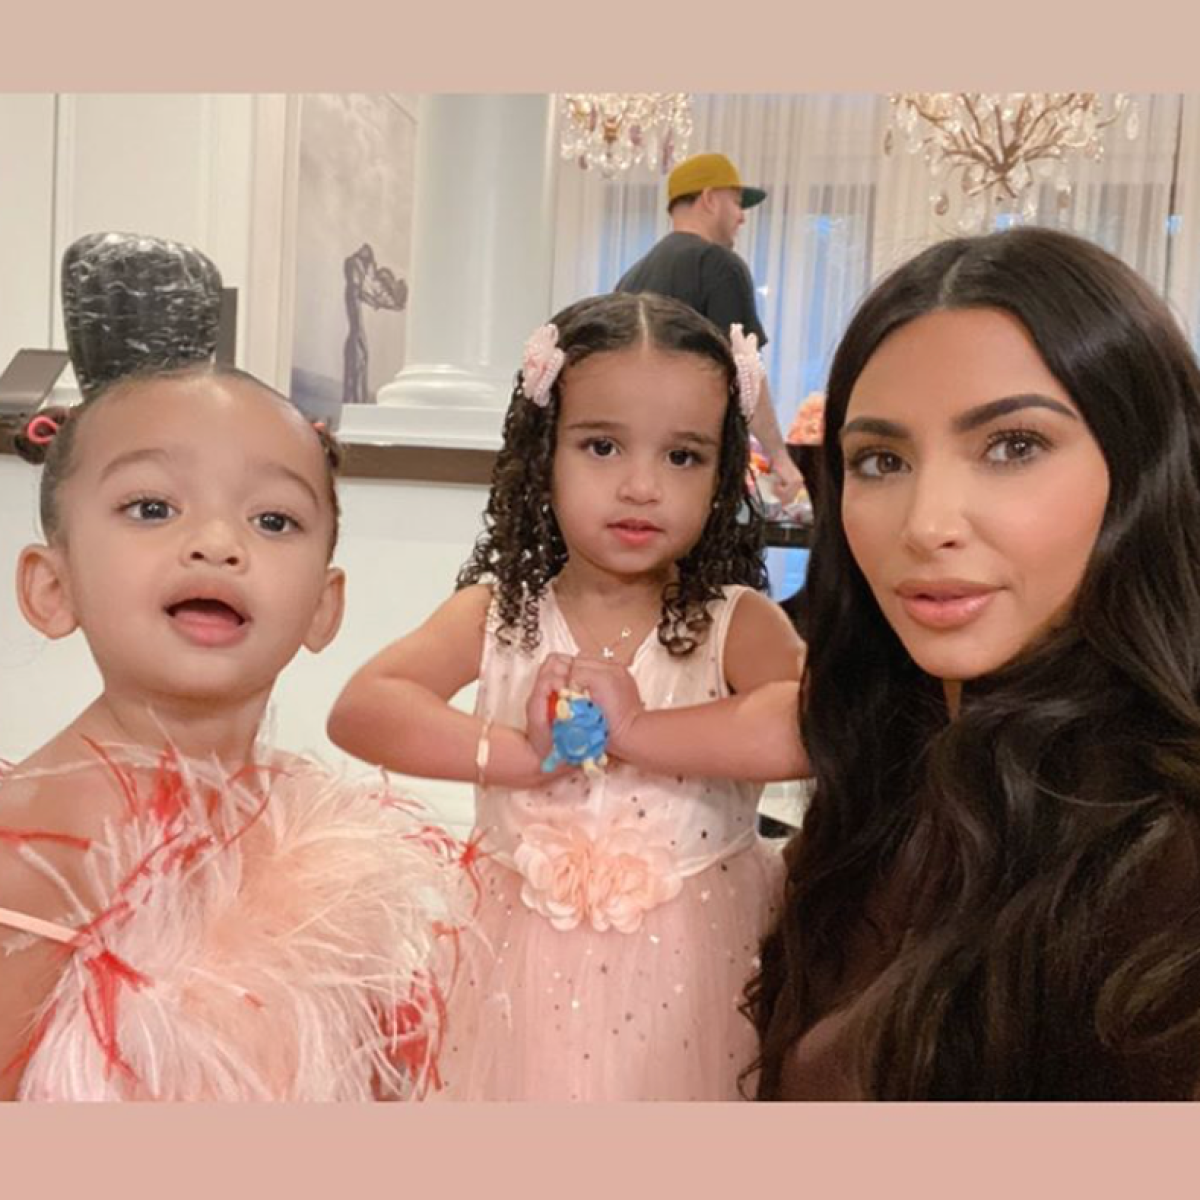 See North West Adorably Wrap Gifts for Cousin Dream Kardashian's B-Day